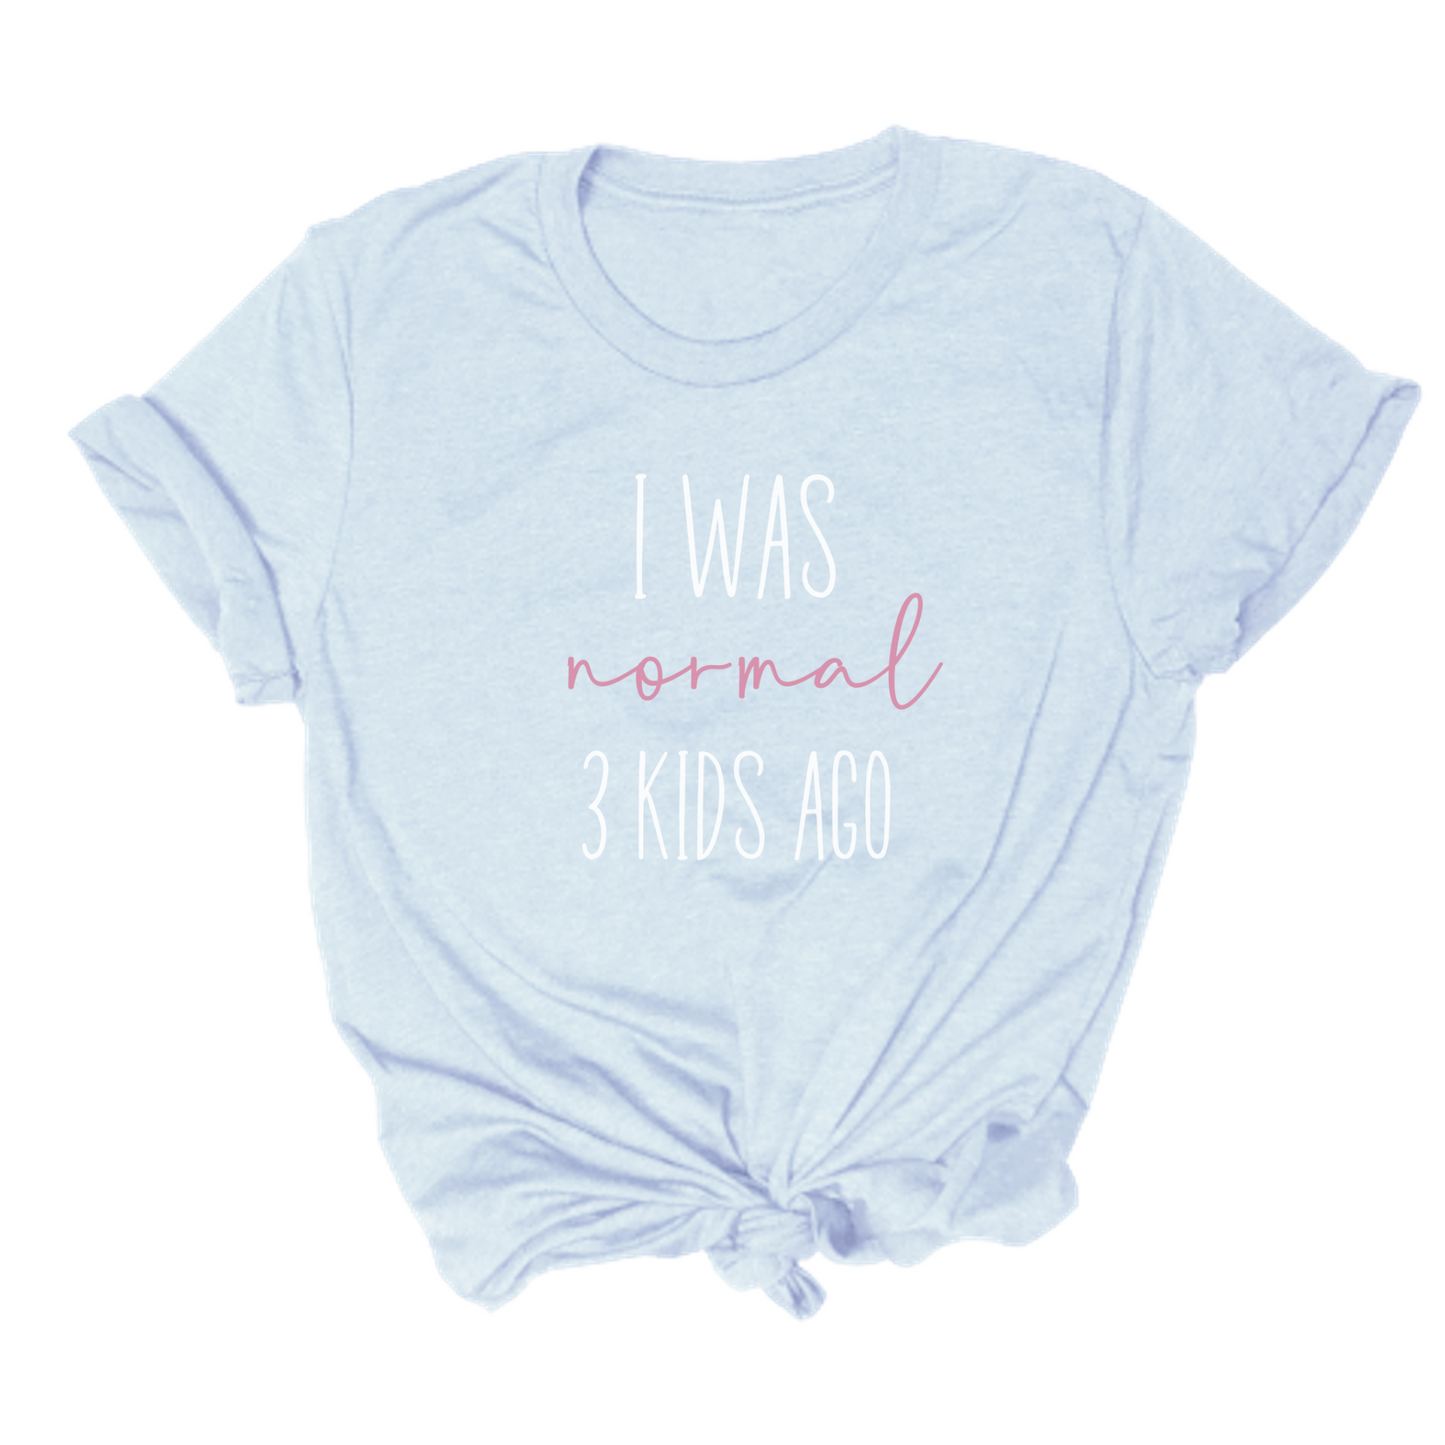 I Was Normal 3 Kids Ago Tee